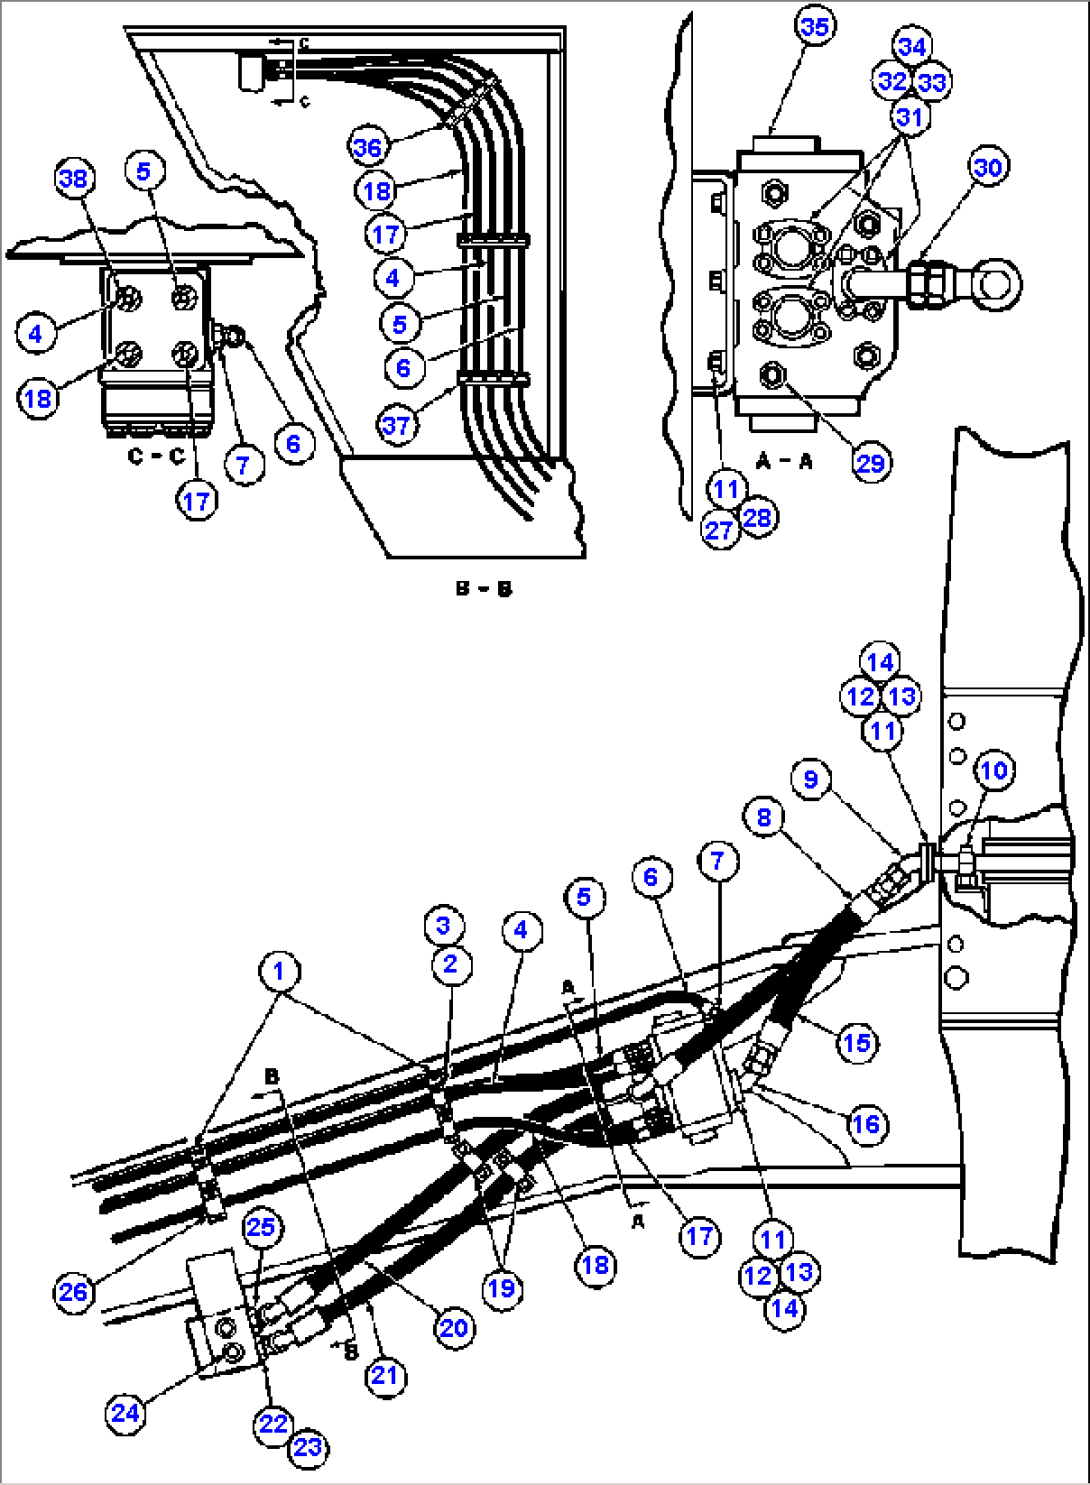 STEERING SYSTEM PIPING